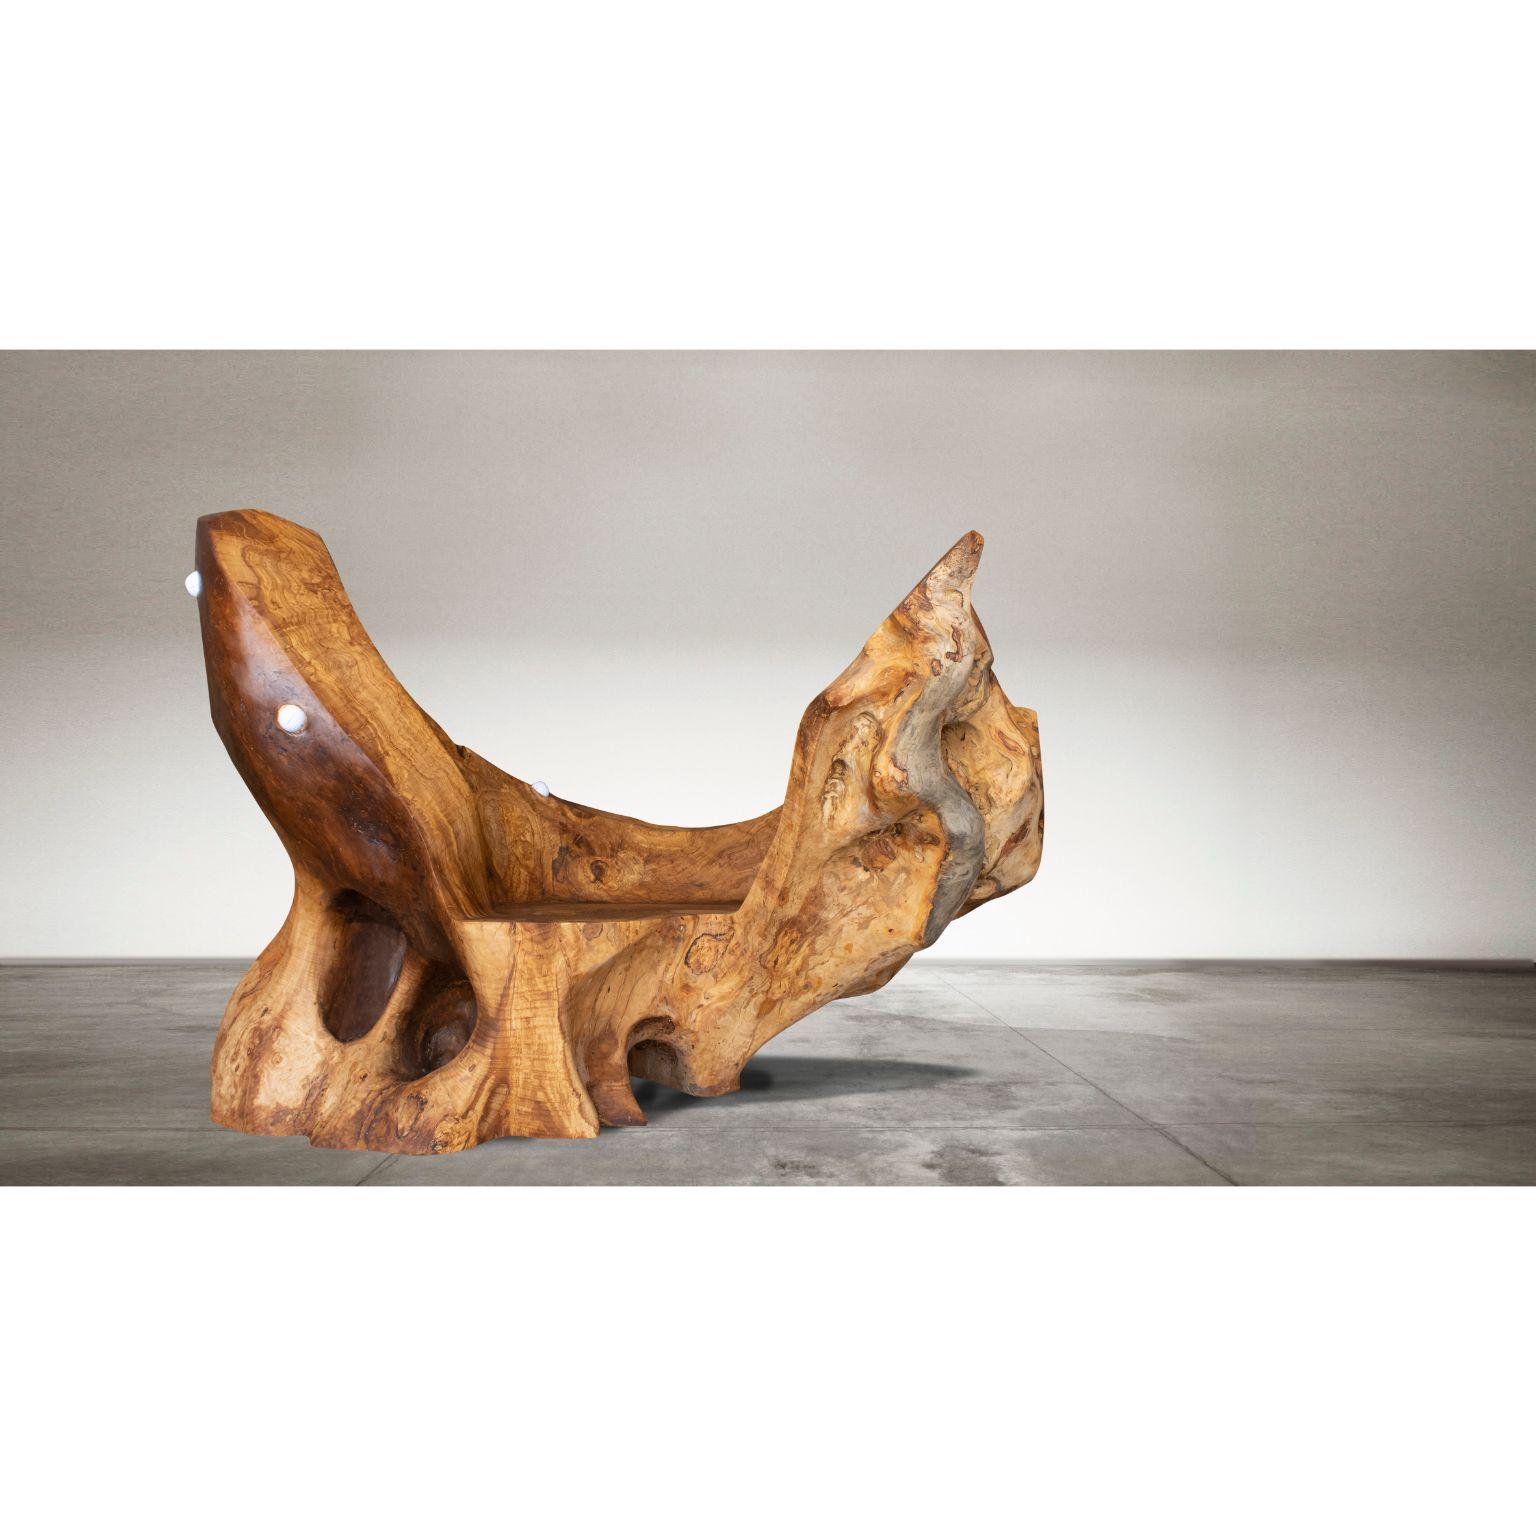 Ariadna bench by Woody Fidler
Materials: Olive wood
Dimensions: W 150 x D 100 x H 105 cm

Woody Fidler feels honored to live in a country where olive growing dates back to 4000 BC, as documented in Minoan civilization.
Deep love for the earth